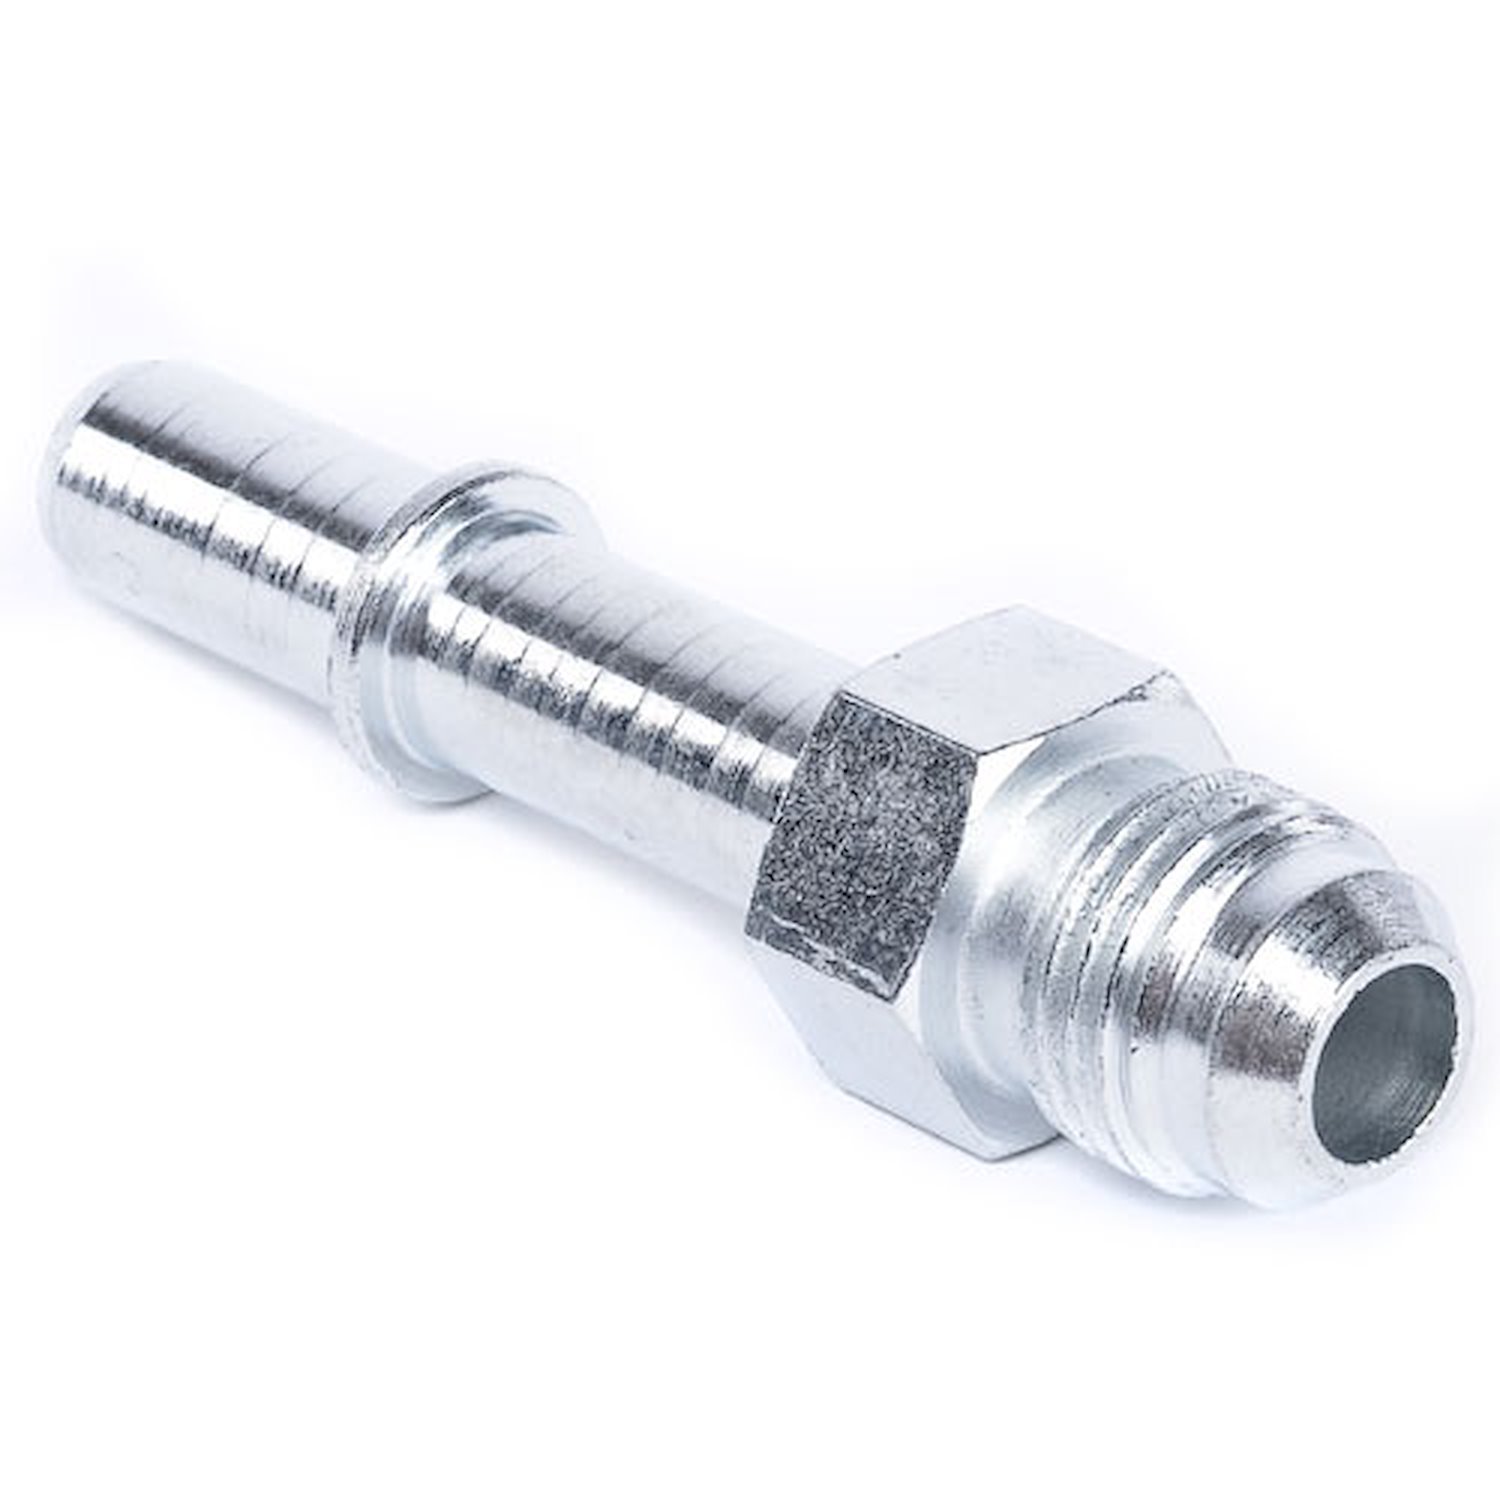 AN to Fuel Injection Quick-Connect Adapter Fitting for GM LT1 [-6 AN Male to 3/8 in. Male Quick-Connect]